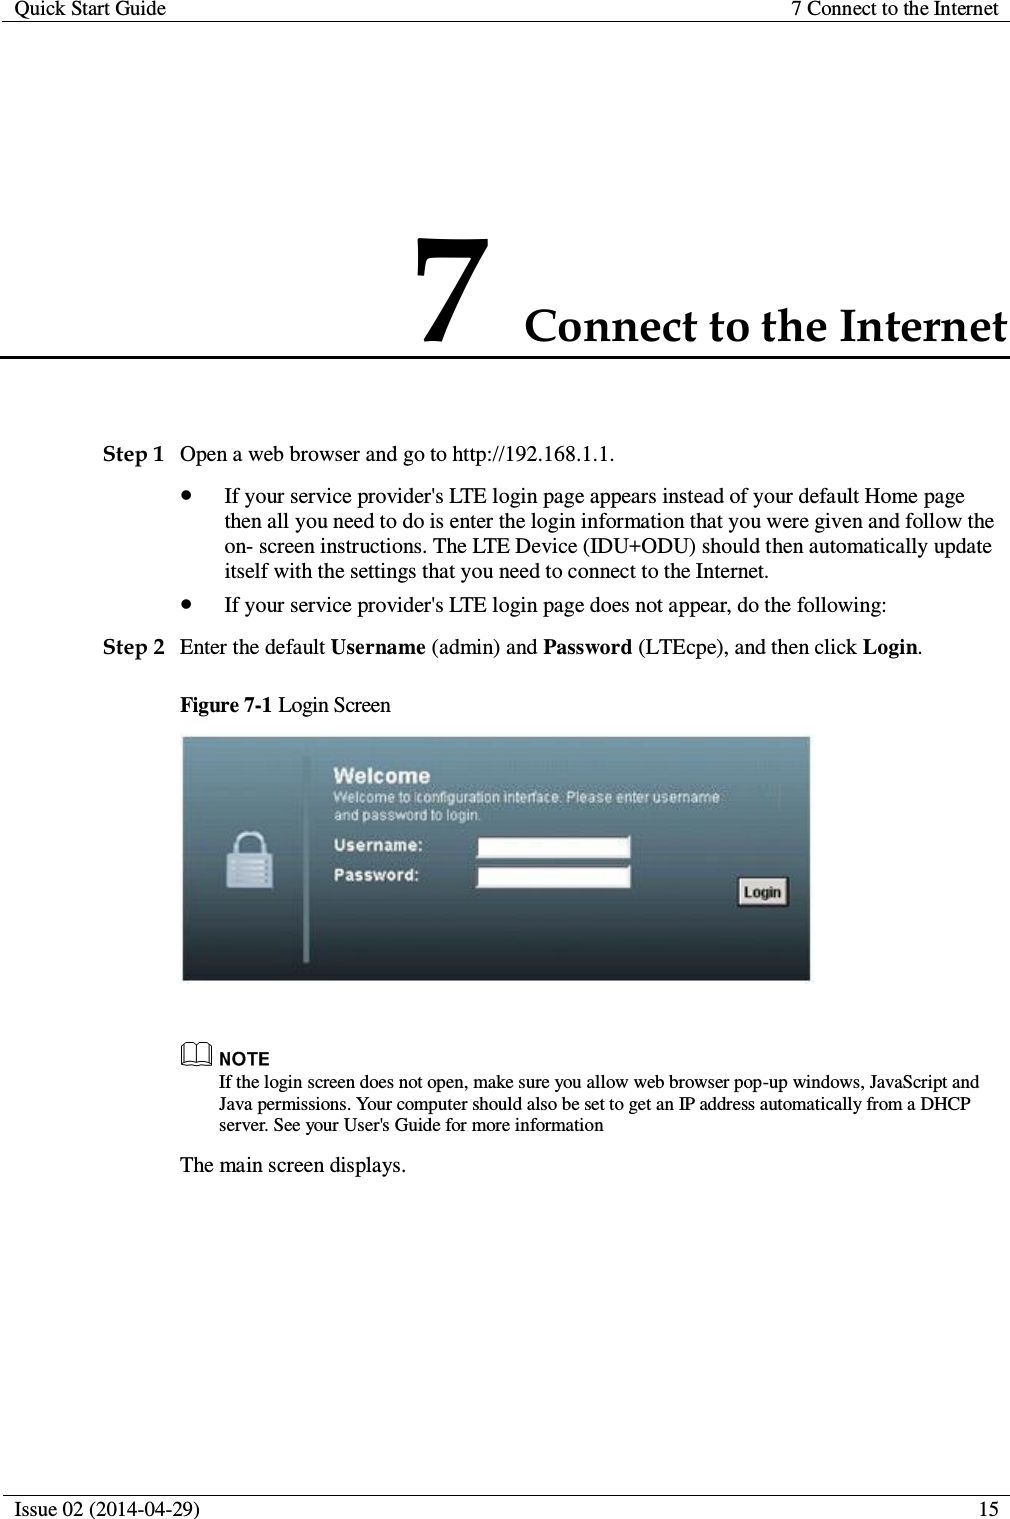 Quick Start Guide 7 Connect to the Internet  Issue 02 (2014-04-29)  15  7 Connect to the Internet Step 1 Open a web browser and go to http://192.168.1.1.  If your service provider&apos;s LTE login page appears instead of your default Home page then all you need to do is enter the login information that you were given and follow the on- screen instructions. The LTE Device (IDU+ODU) should then automatically update itself with the settings that you need to connect to the Internet.  If your service provider&apos;s LTE login page does not appear, do the following: Step 2 Enter the default Username (admin) and Password (LTEcpe), and then click Login. Figure 7-1 Login Screen    If the login screen does not open, make sure you allow web browser pop-up windows, JavaScript and Java permissions. Your computer should also be set to get an IP address automatically from a DHCP server. See your User&apos;s Guide for more information The main screen displays. 